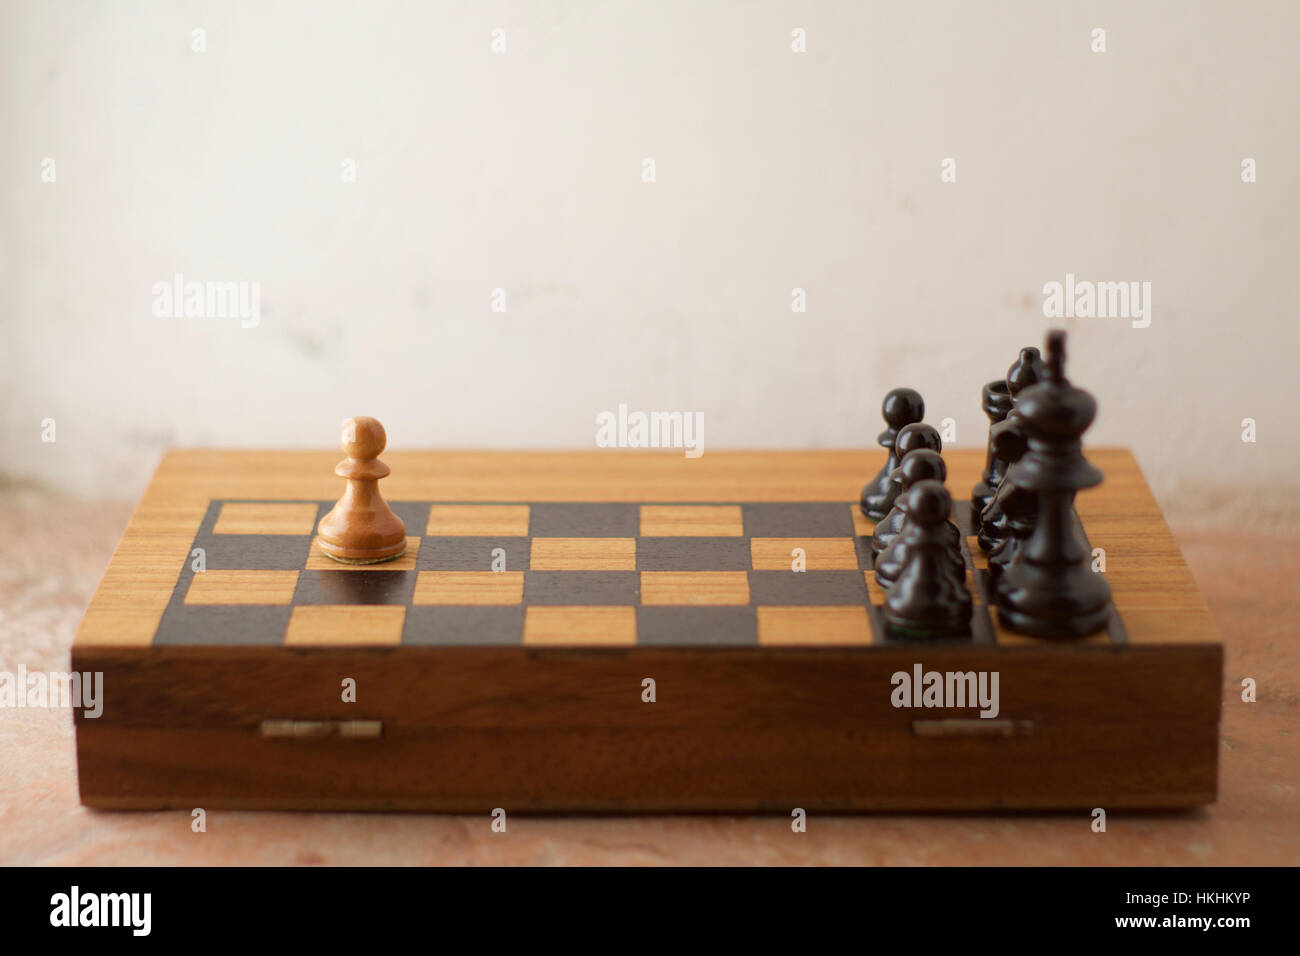 A half chess board with chess pieces arranged showing one white pawn against many black pieces Stock Photo